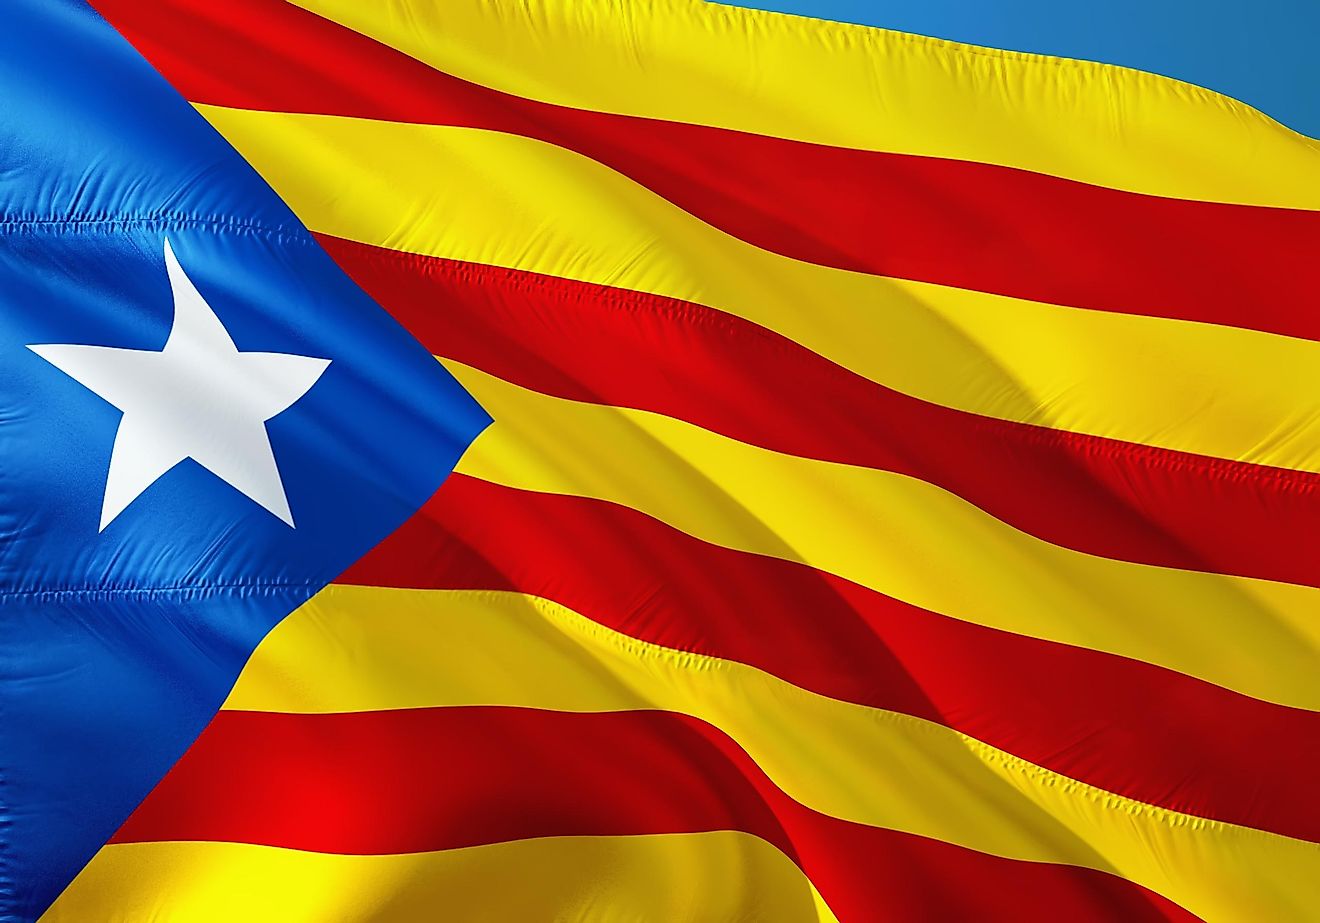 The flag of Catalonia. 